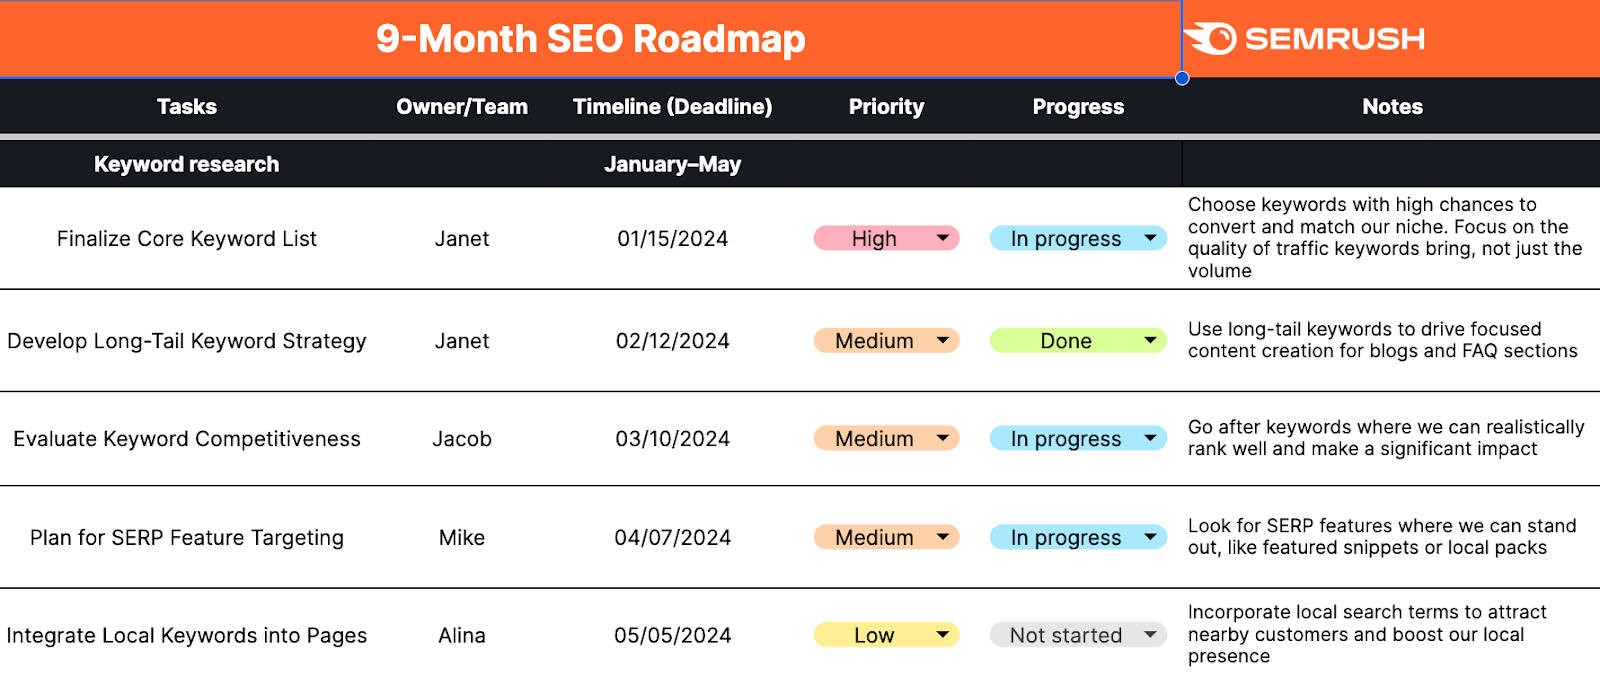 9-month SEO roadmap with assignees filled in